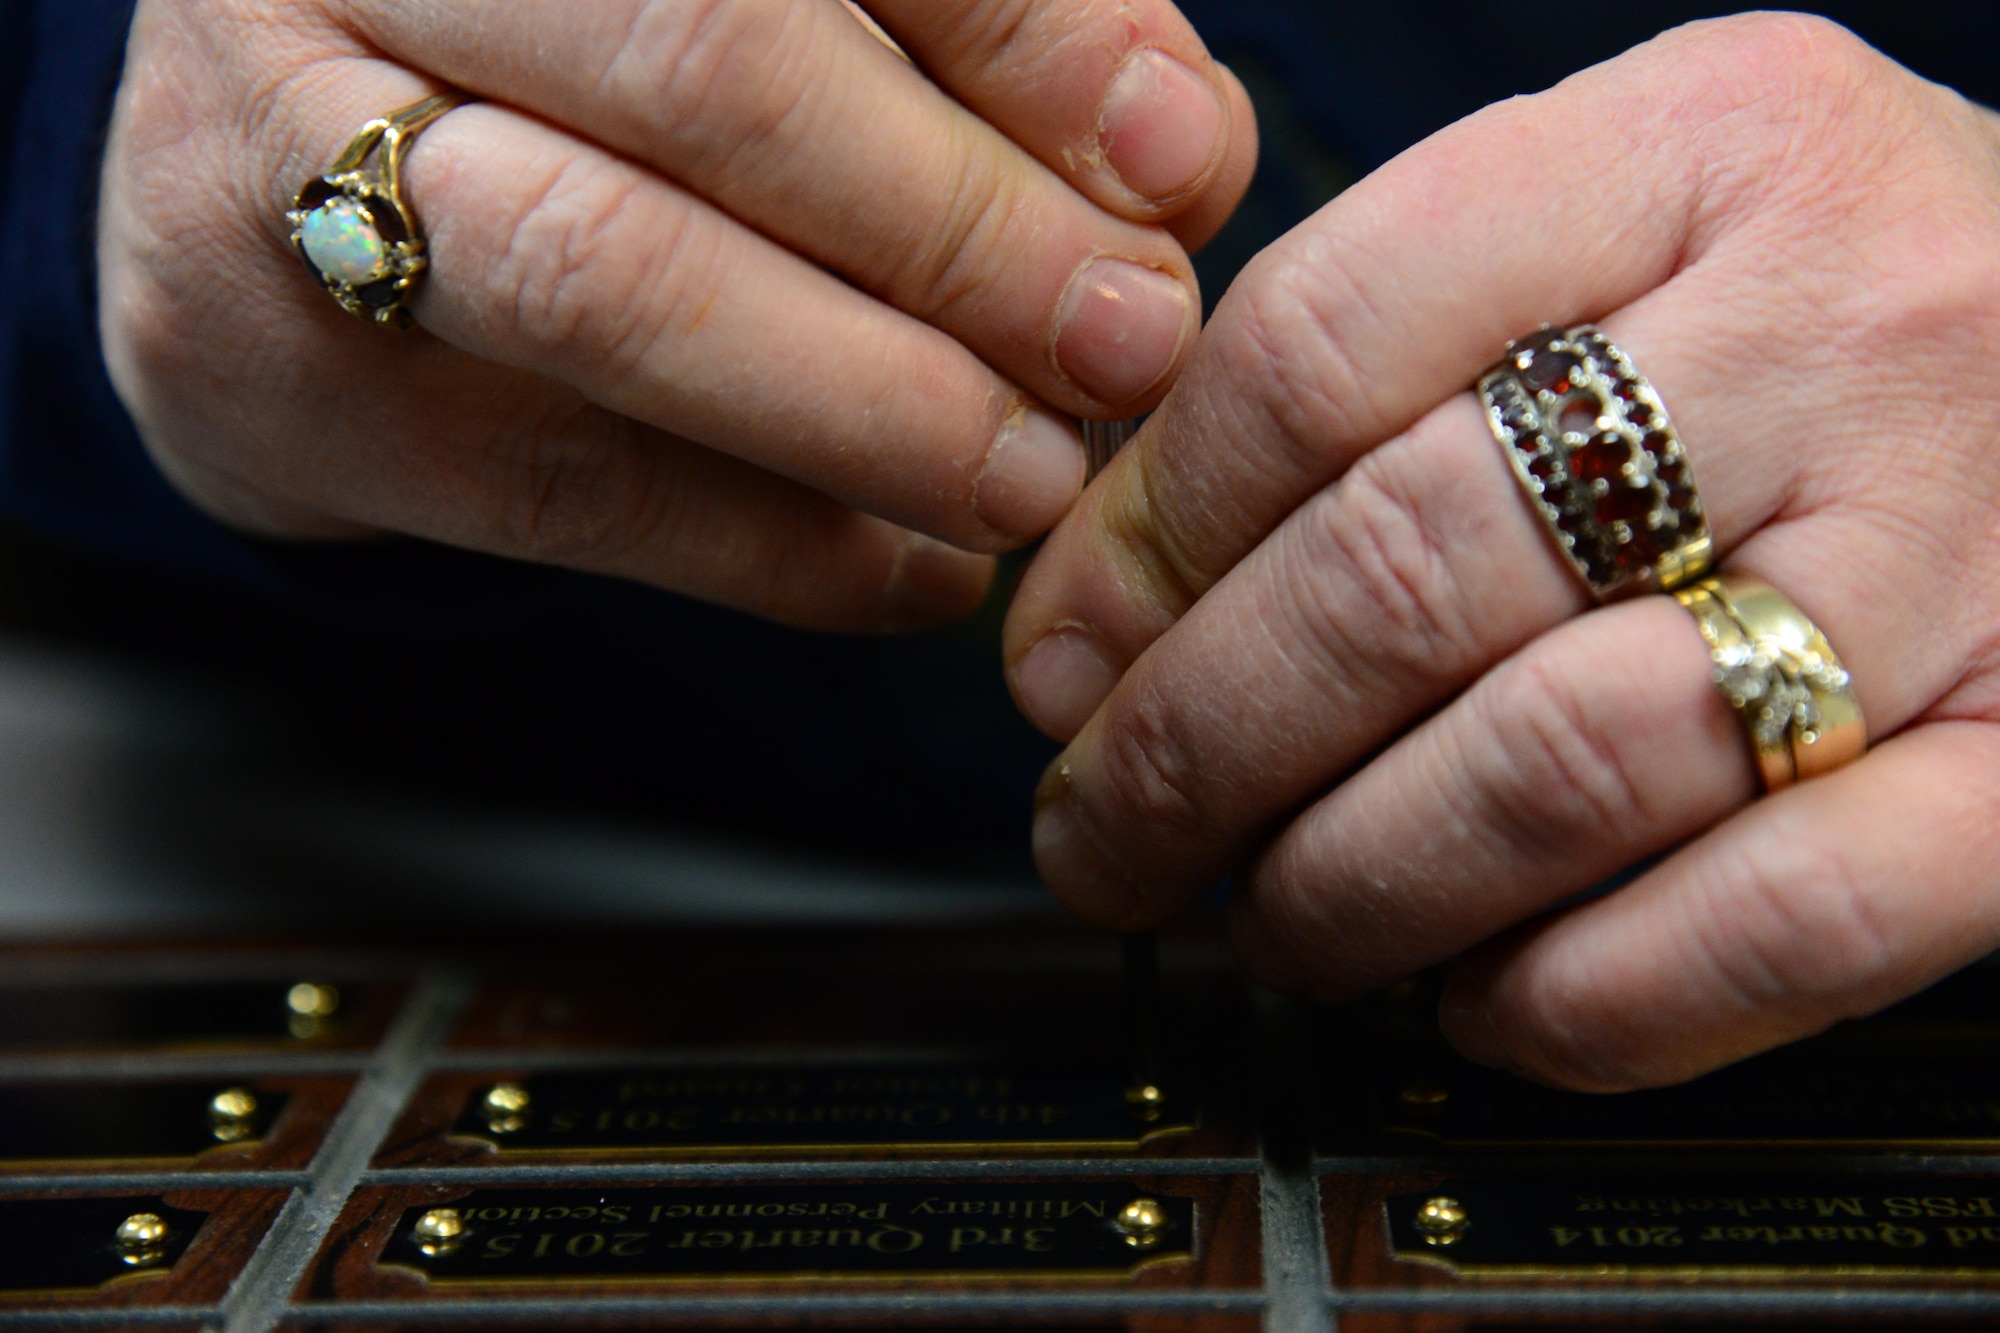 Sherry Pschernig, 341st Force Support Squadrons Arts and Crafts Center engraver, screws down a name plate Dec. 7, 2016, at Malmstrom Air Force Base, Mont. Pschernig is one of two individuals who work in the shop, where they make the majority of their products from scratch, to include wooden plaques, trophies and awards. (U.S. Air Force photo/Airman 1st Class Magen M. Reeves)